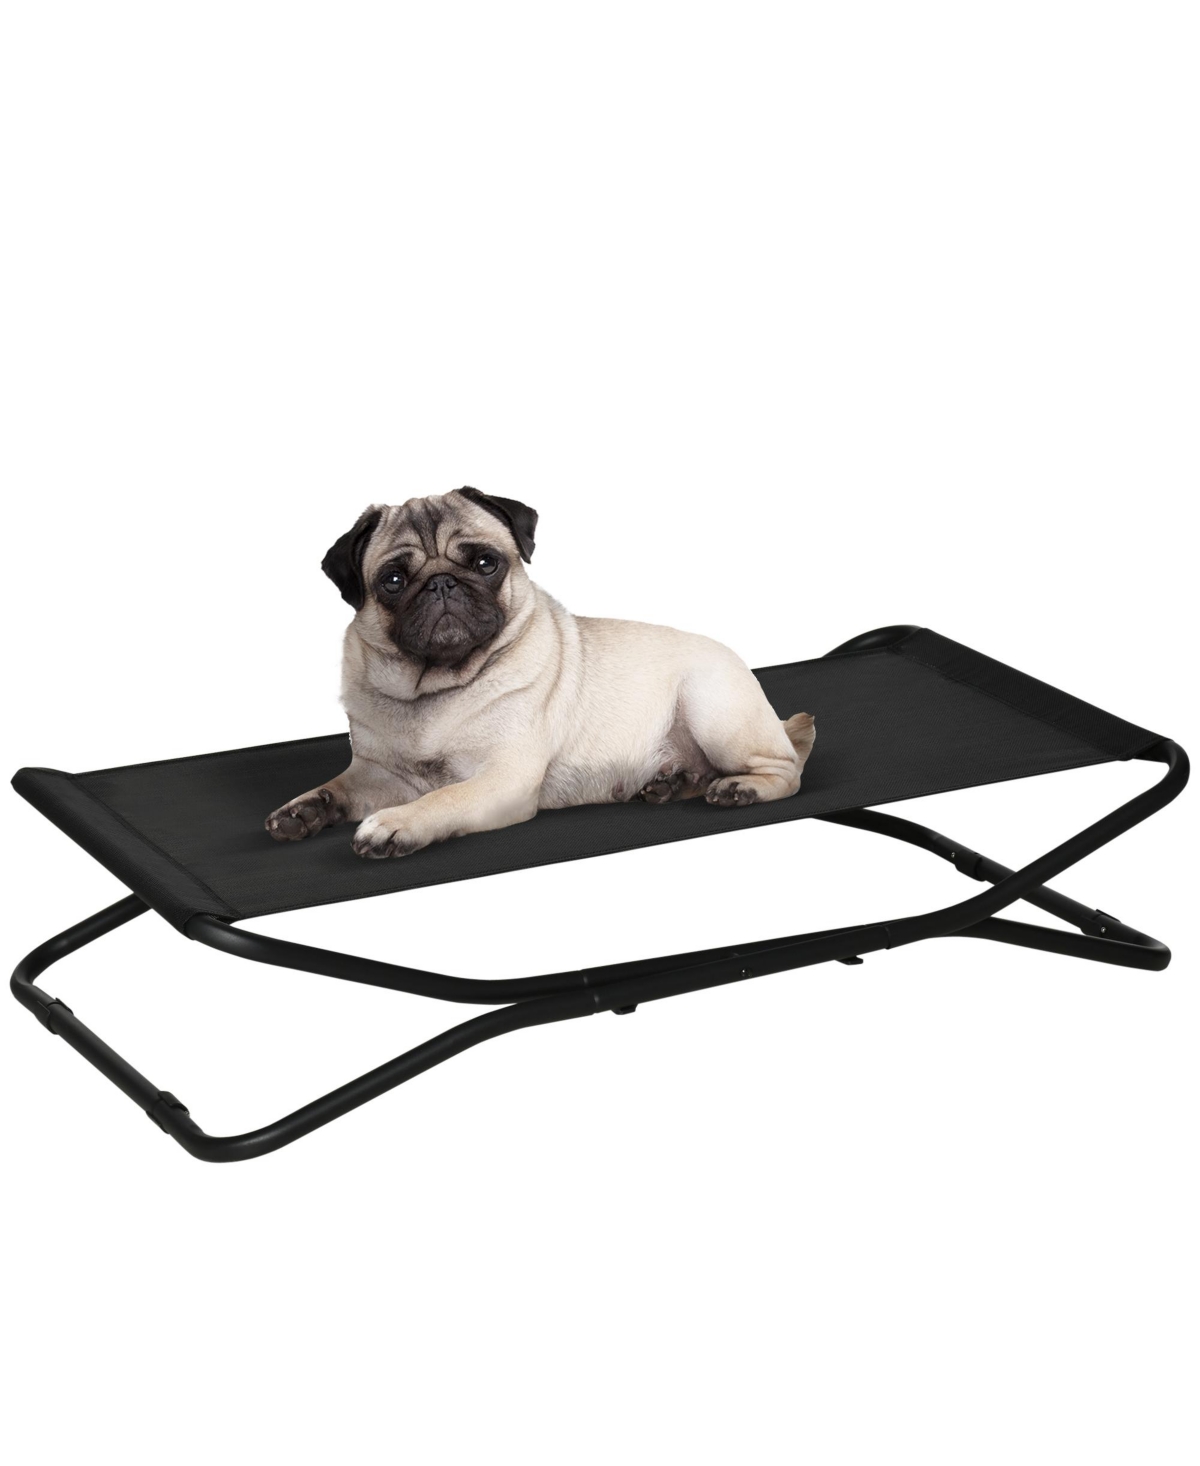 Elevated Dog Bed with Breathable Fabric, Foldable Pet Cot with Heavy Duty Steel Frame, Portable Cooling Pet Bed Indoor Outdoor Use, for Small M